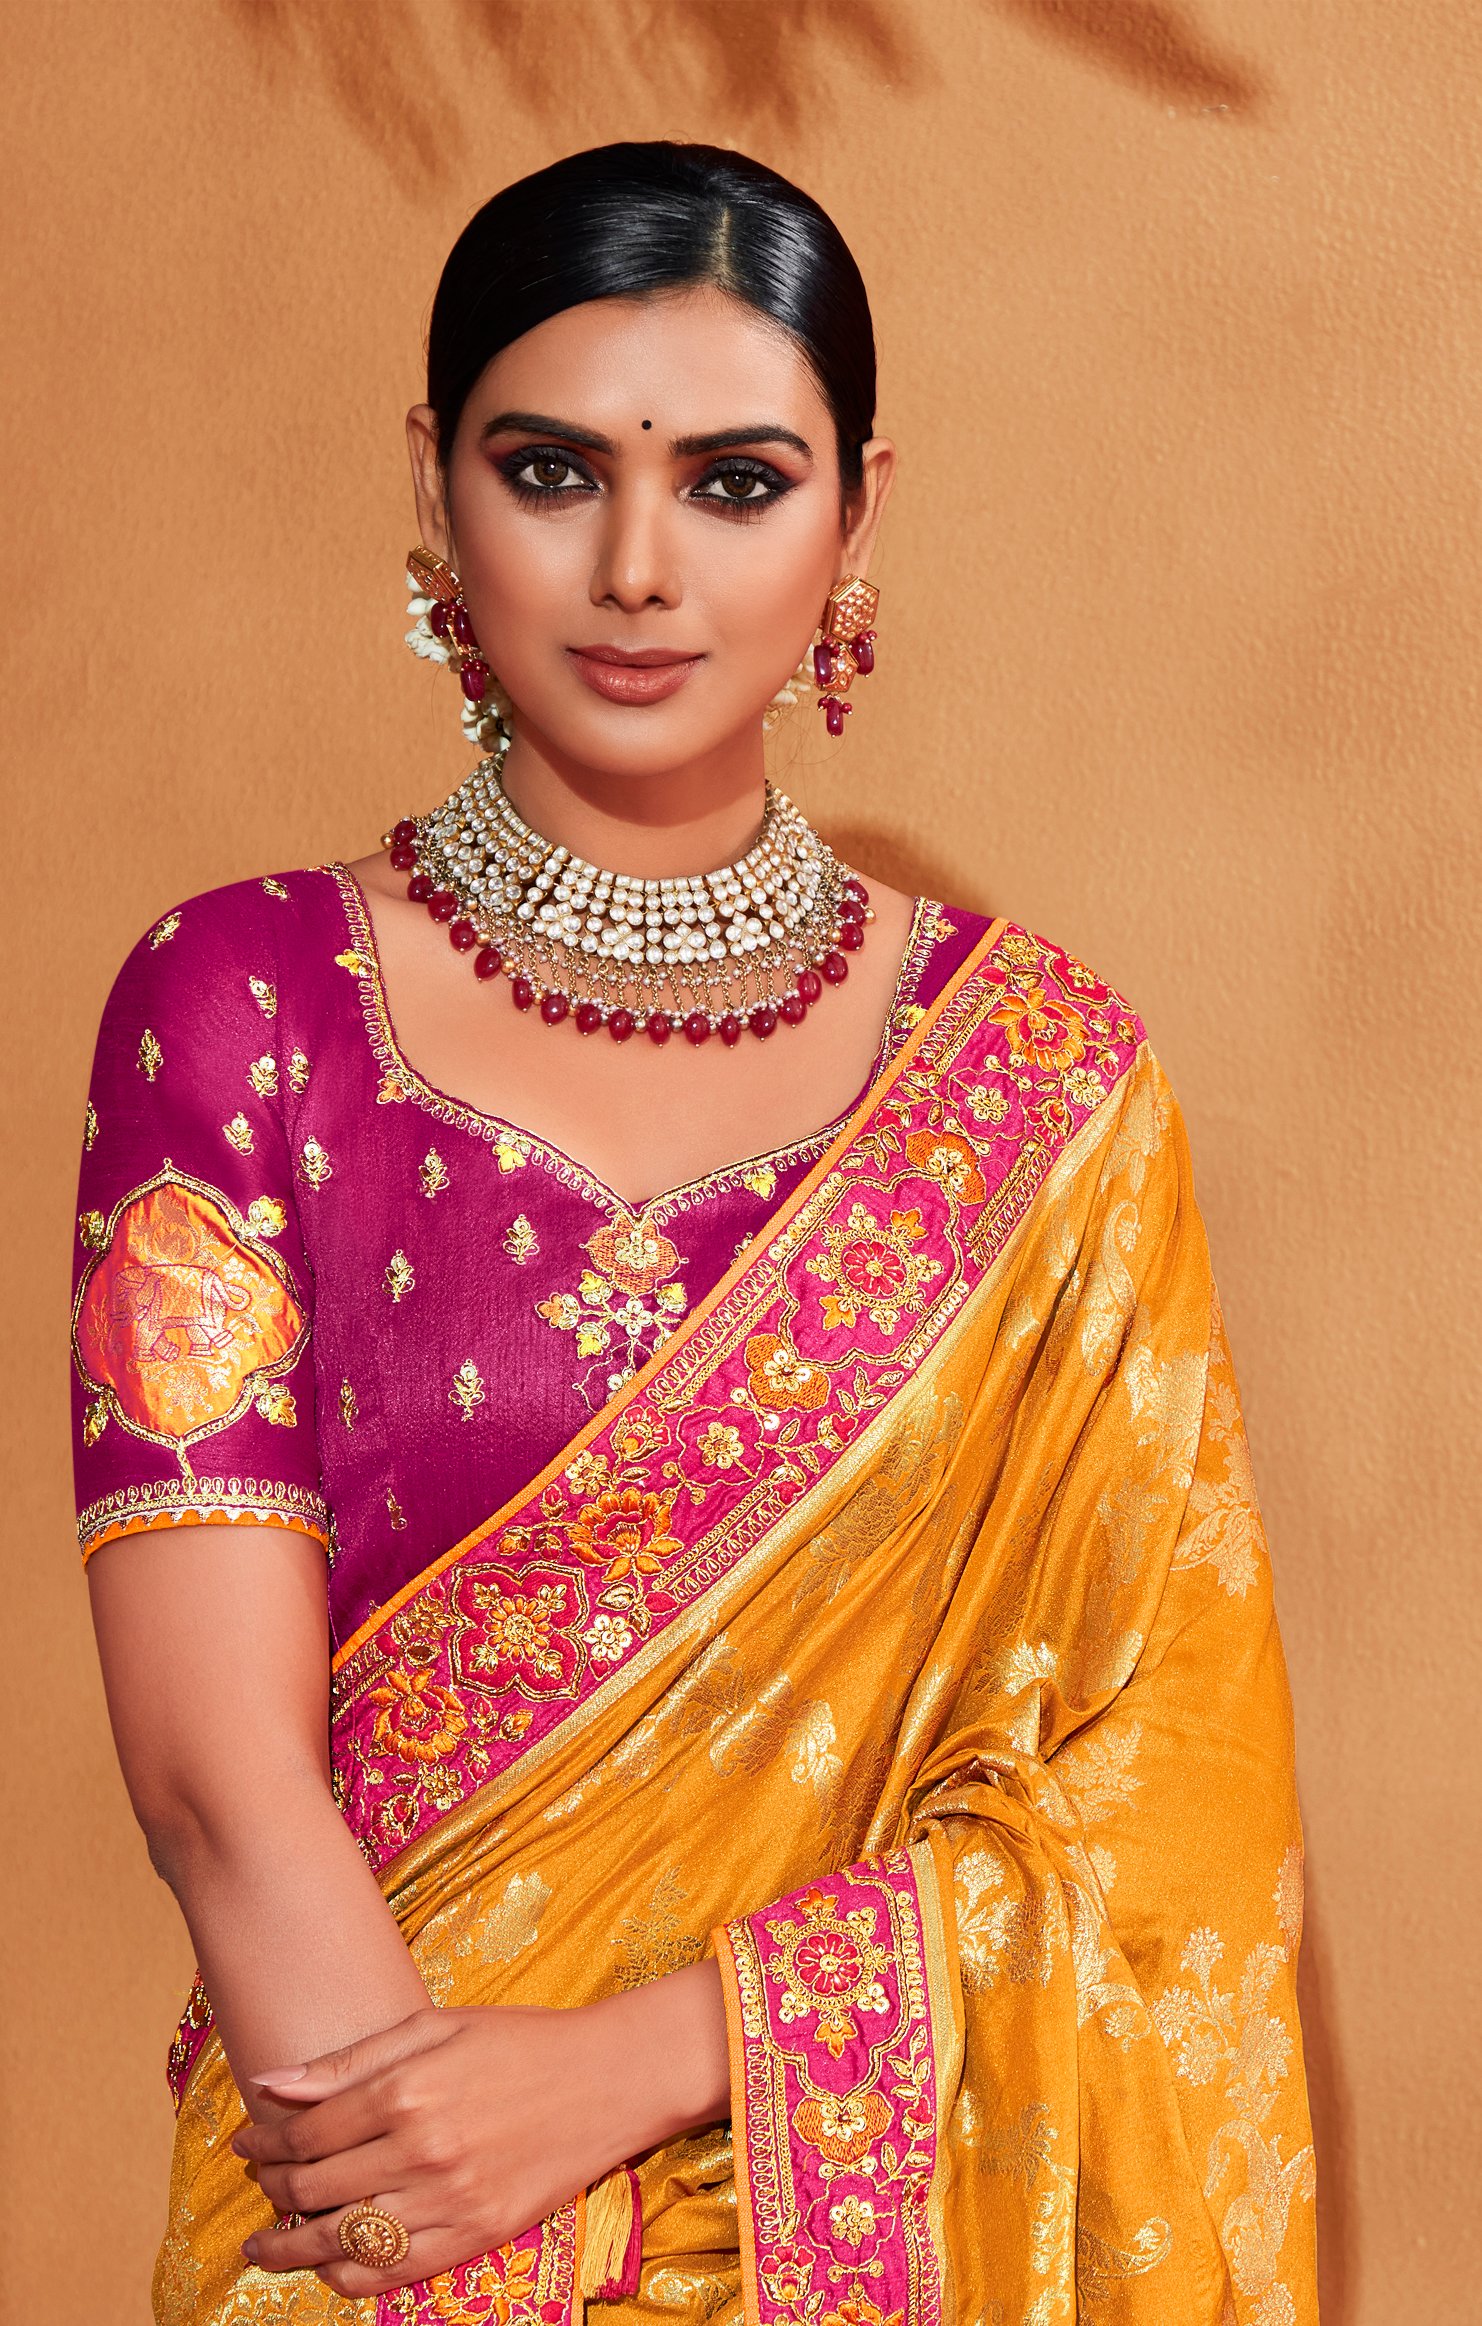 Shivangi - Simple and elegant ready to wear halfsaree to upon any special  occasion. Explore more :https://www.shivangiclothing.com/collections/half- saree-langa-voni #halfsaree #langavoni #dhavani #halfsareelehenga  #traditionalhalfsaree #pattuhalfsaree ...